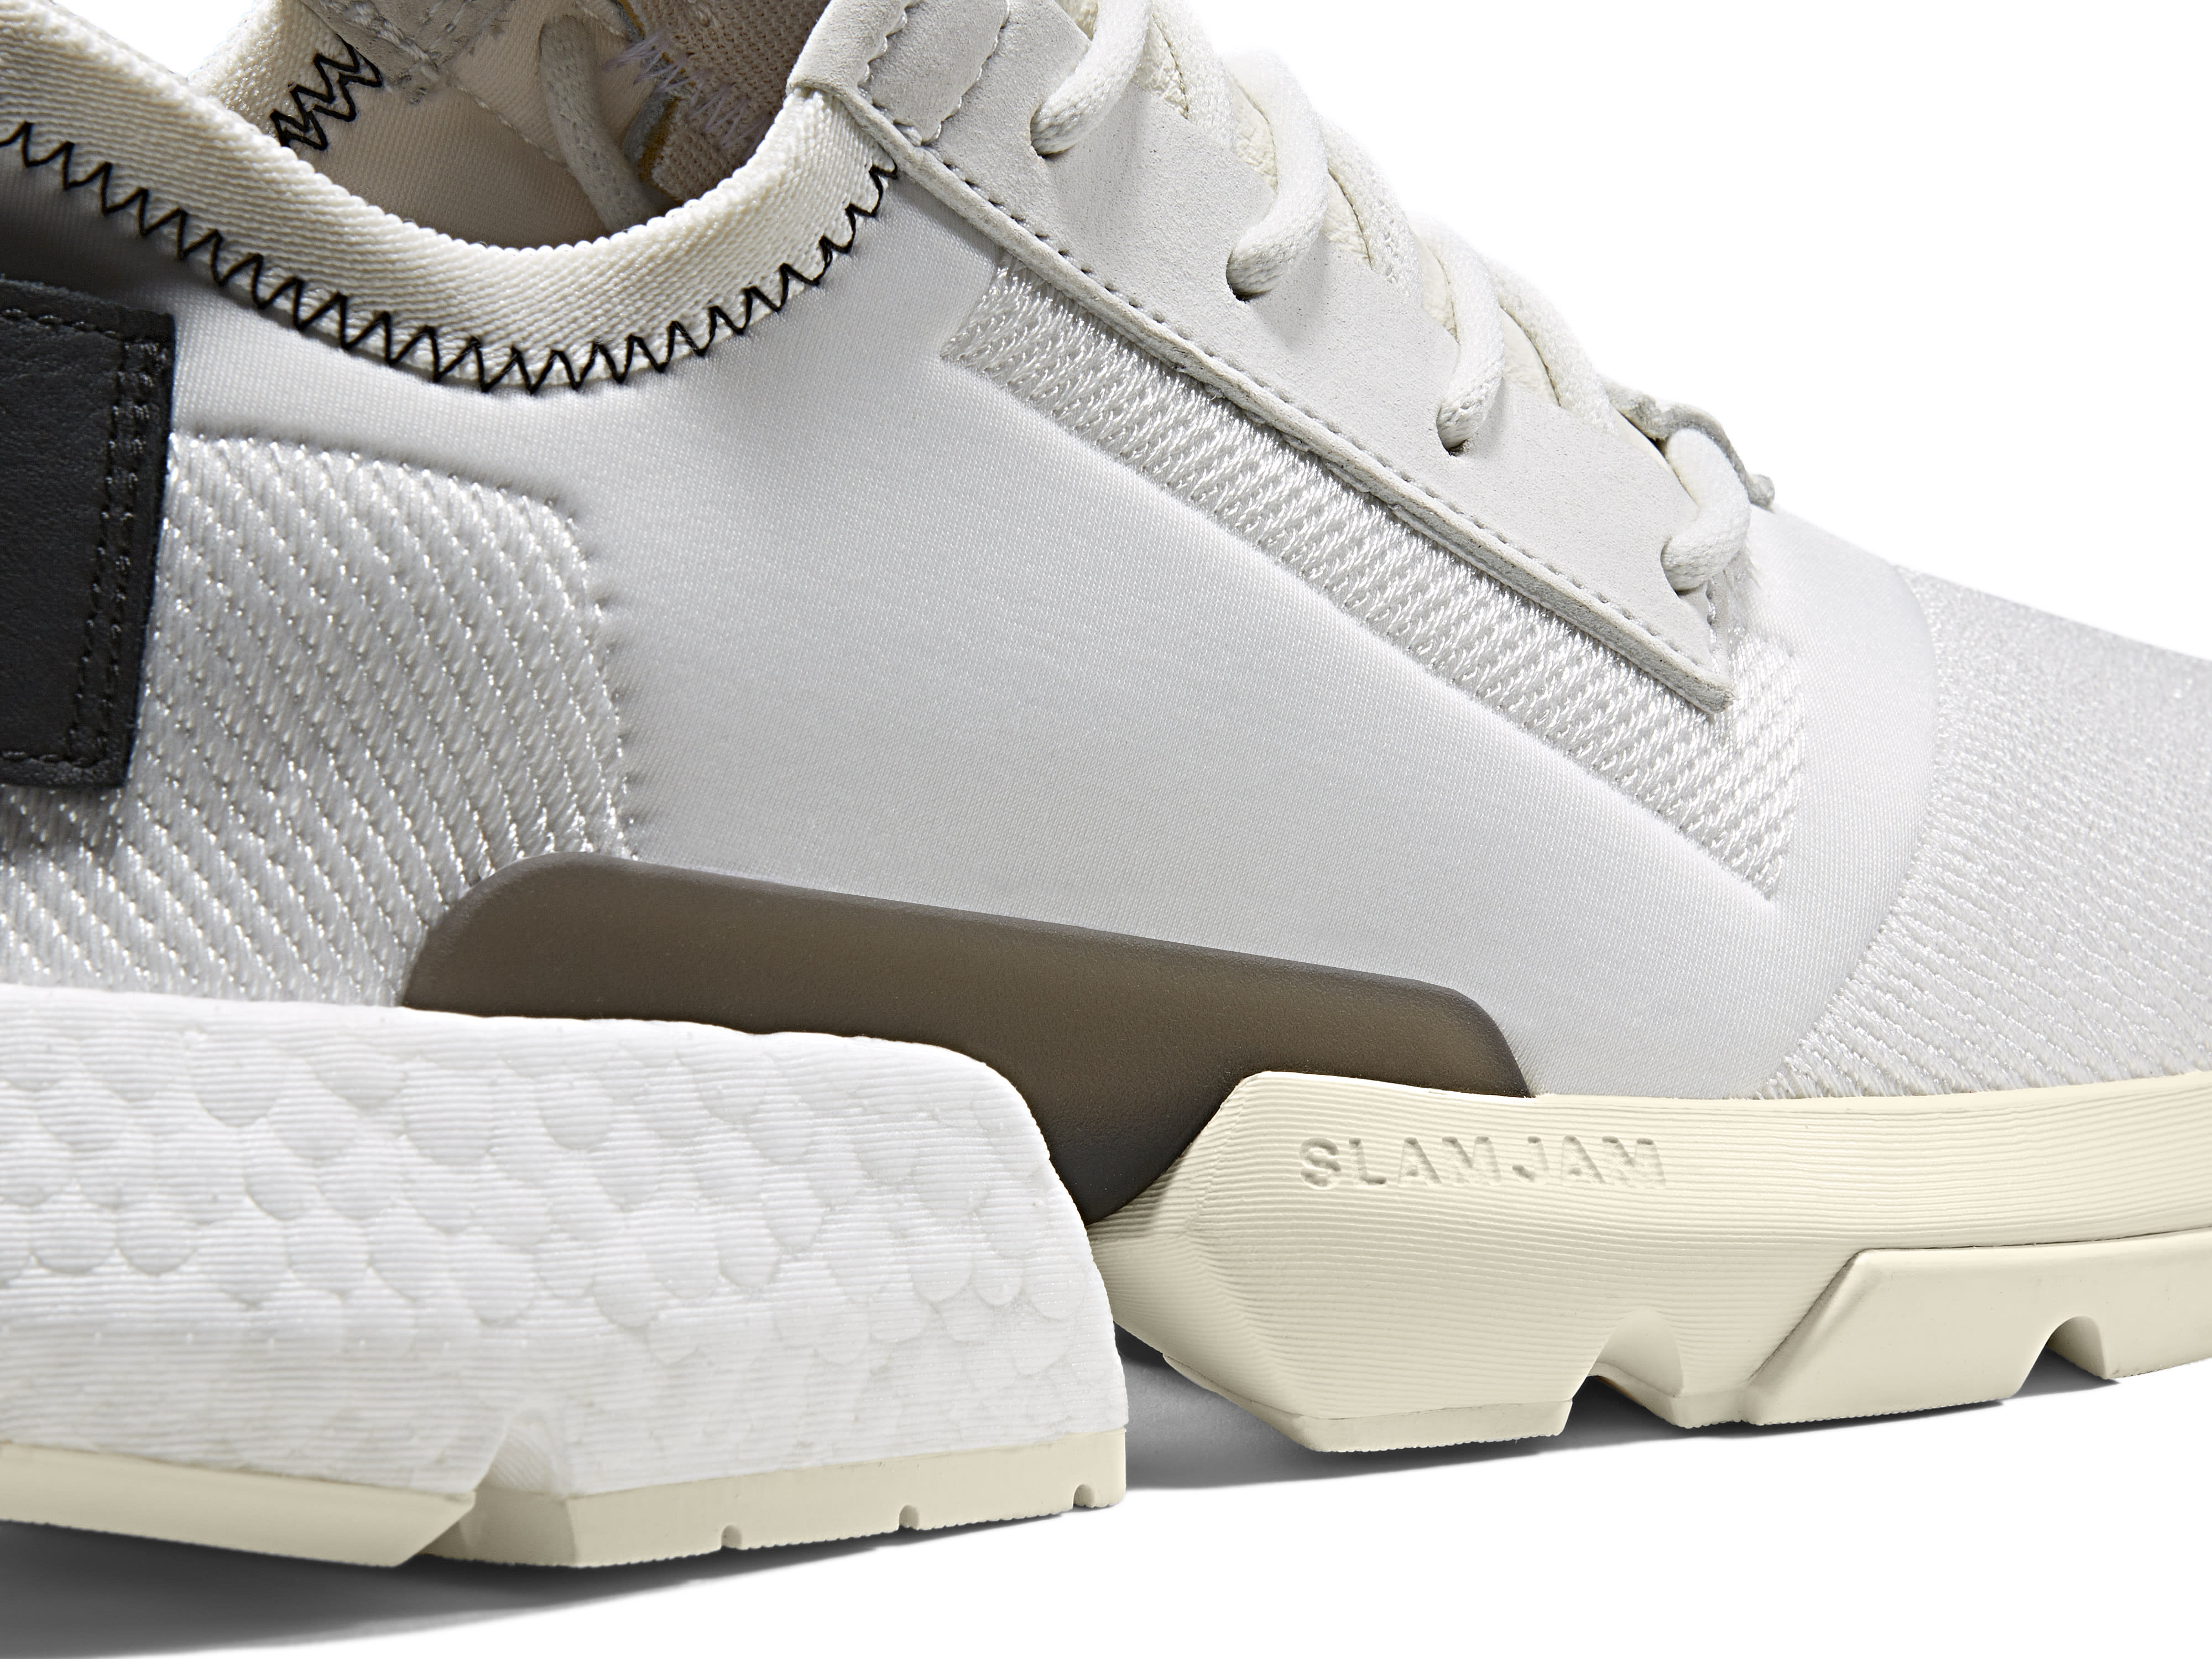 Slam Jam x Adidas P.O.D. System (Lateral Detail)